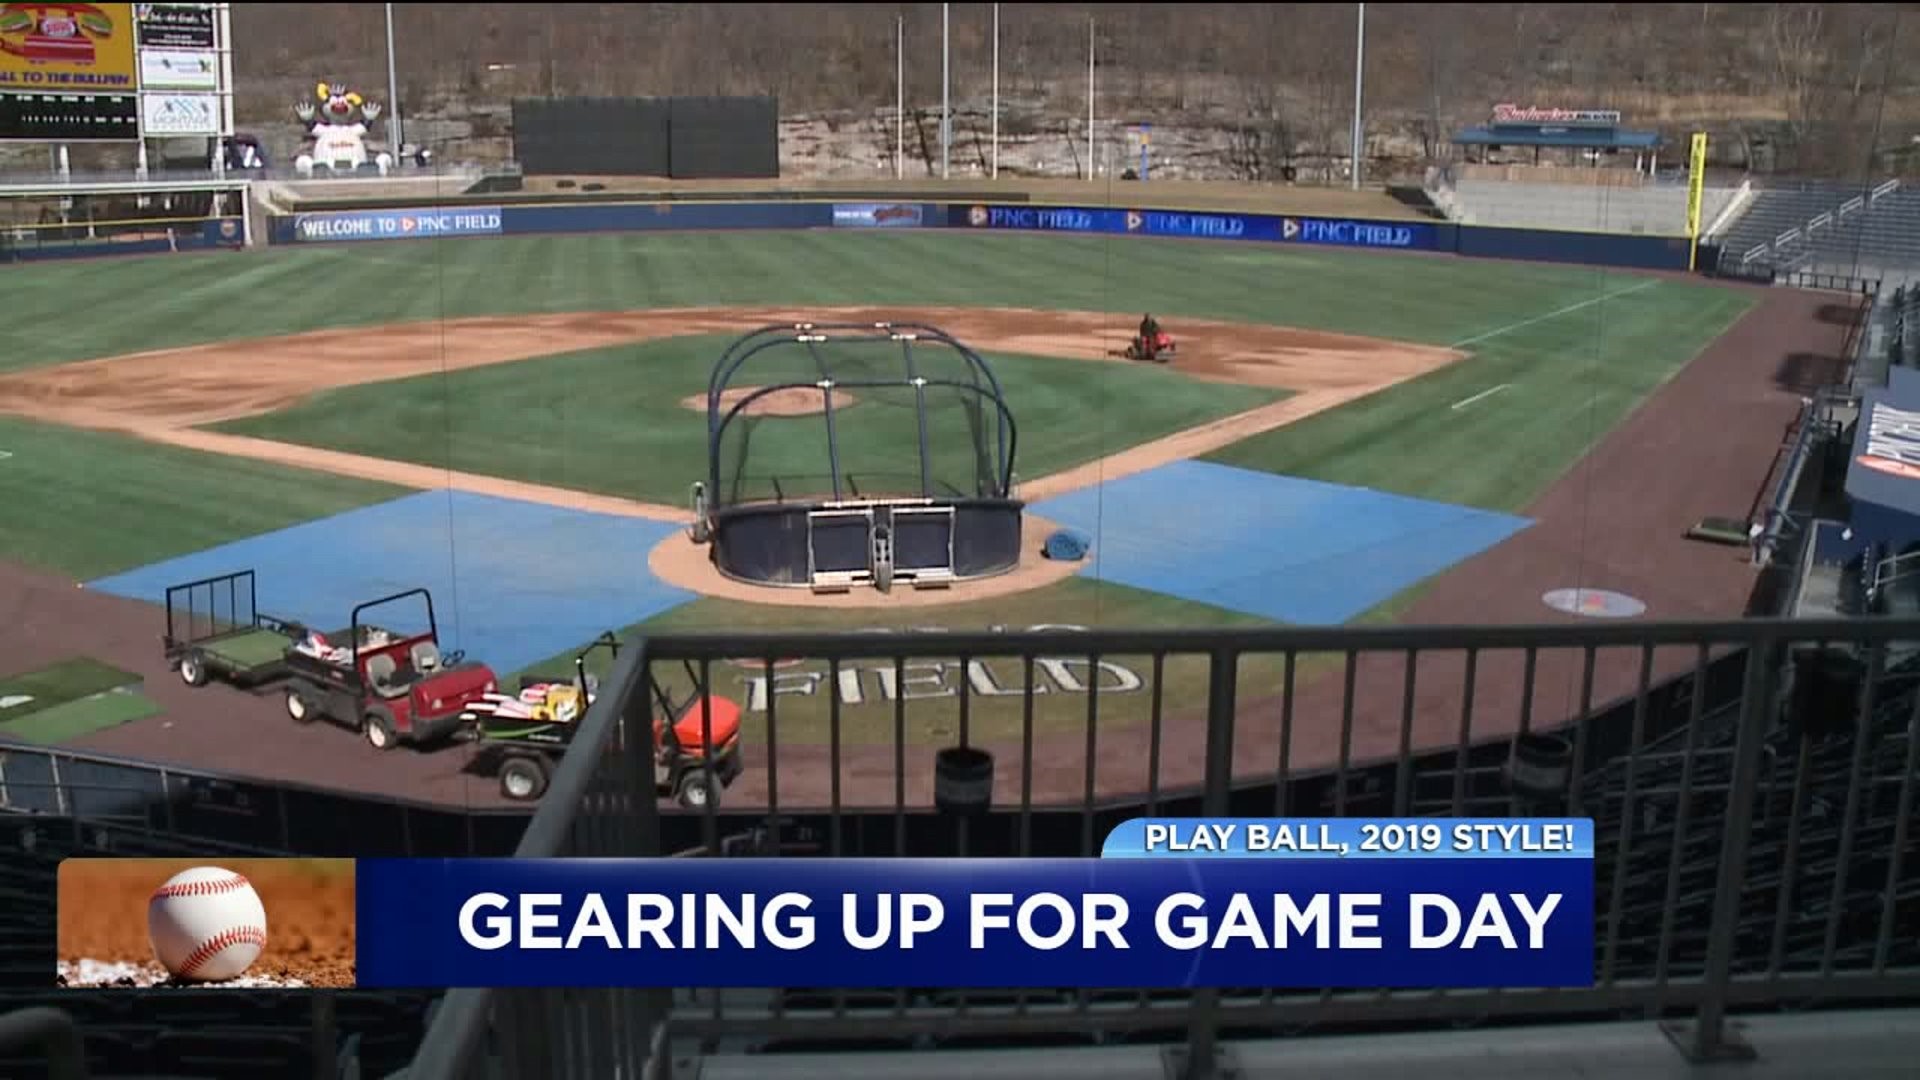 Play Ball, 2019 Style: RailRiders Gear up for Home Opener